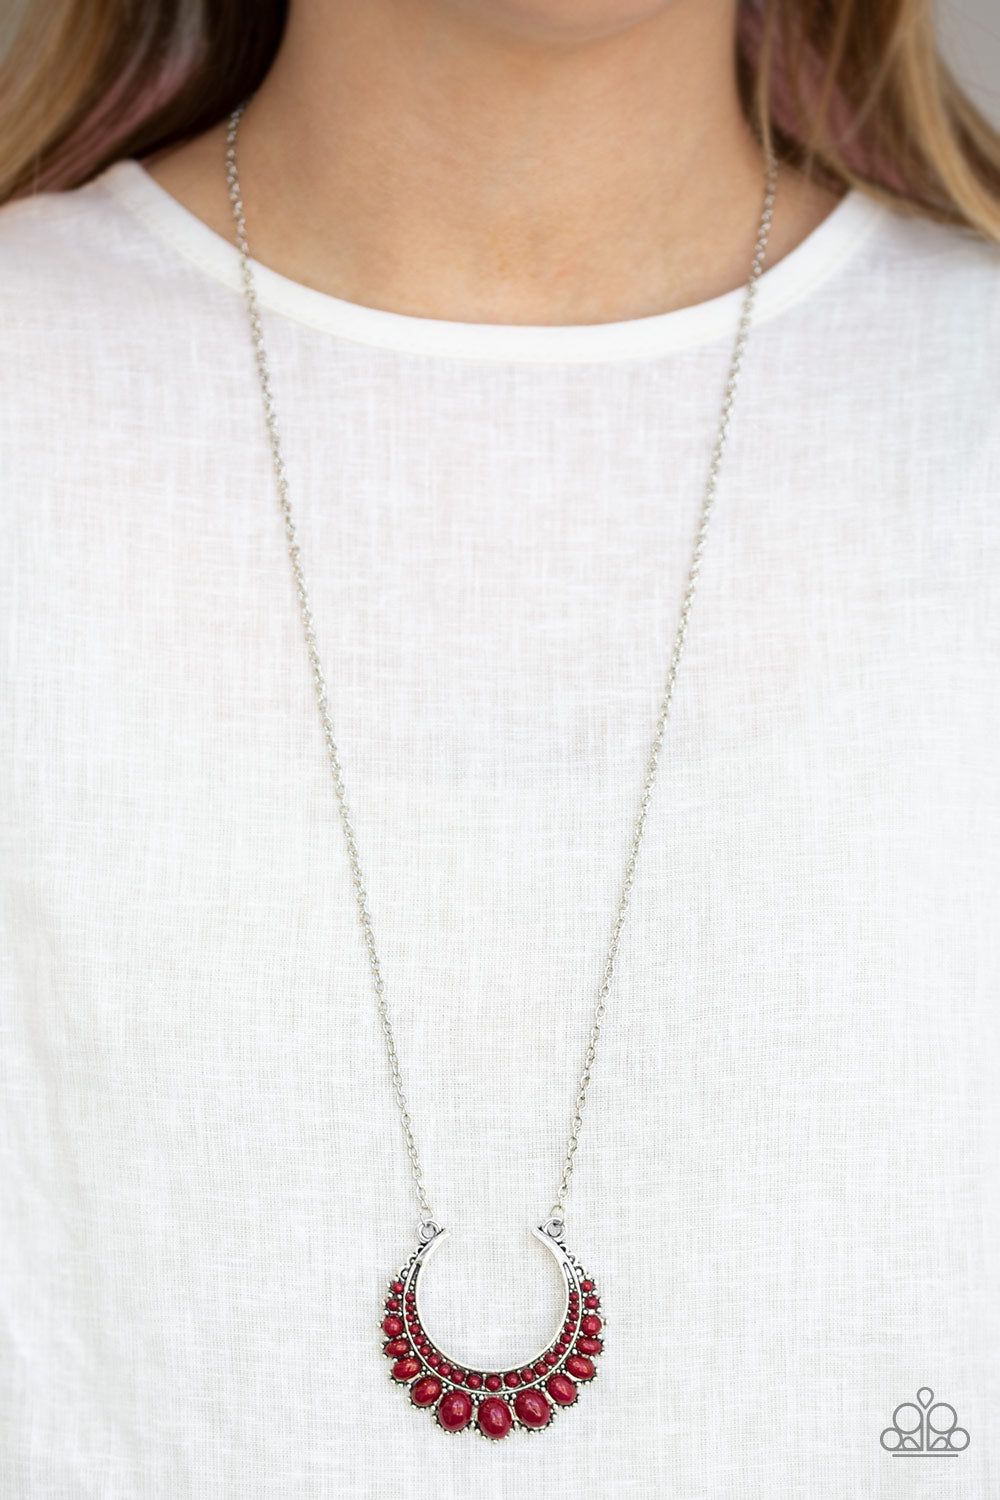 Count To ZEN Necklace - Red